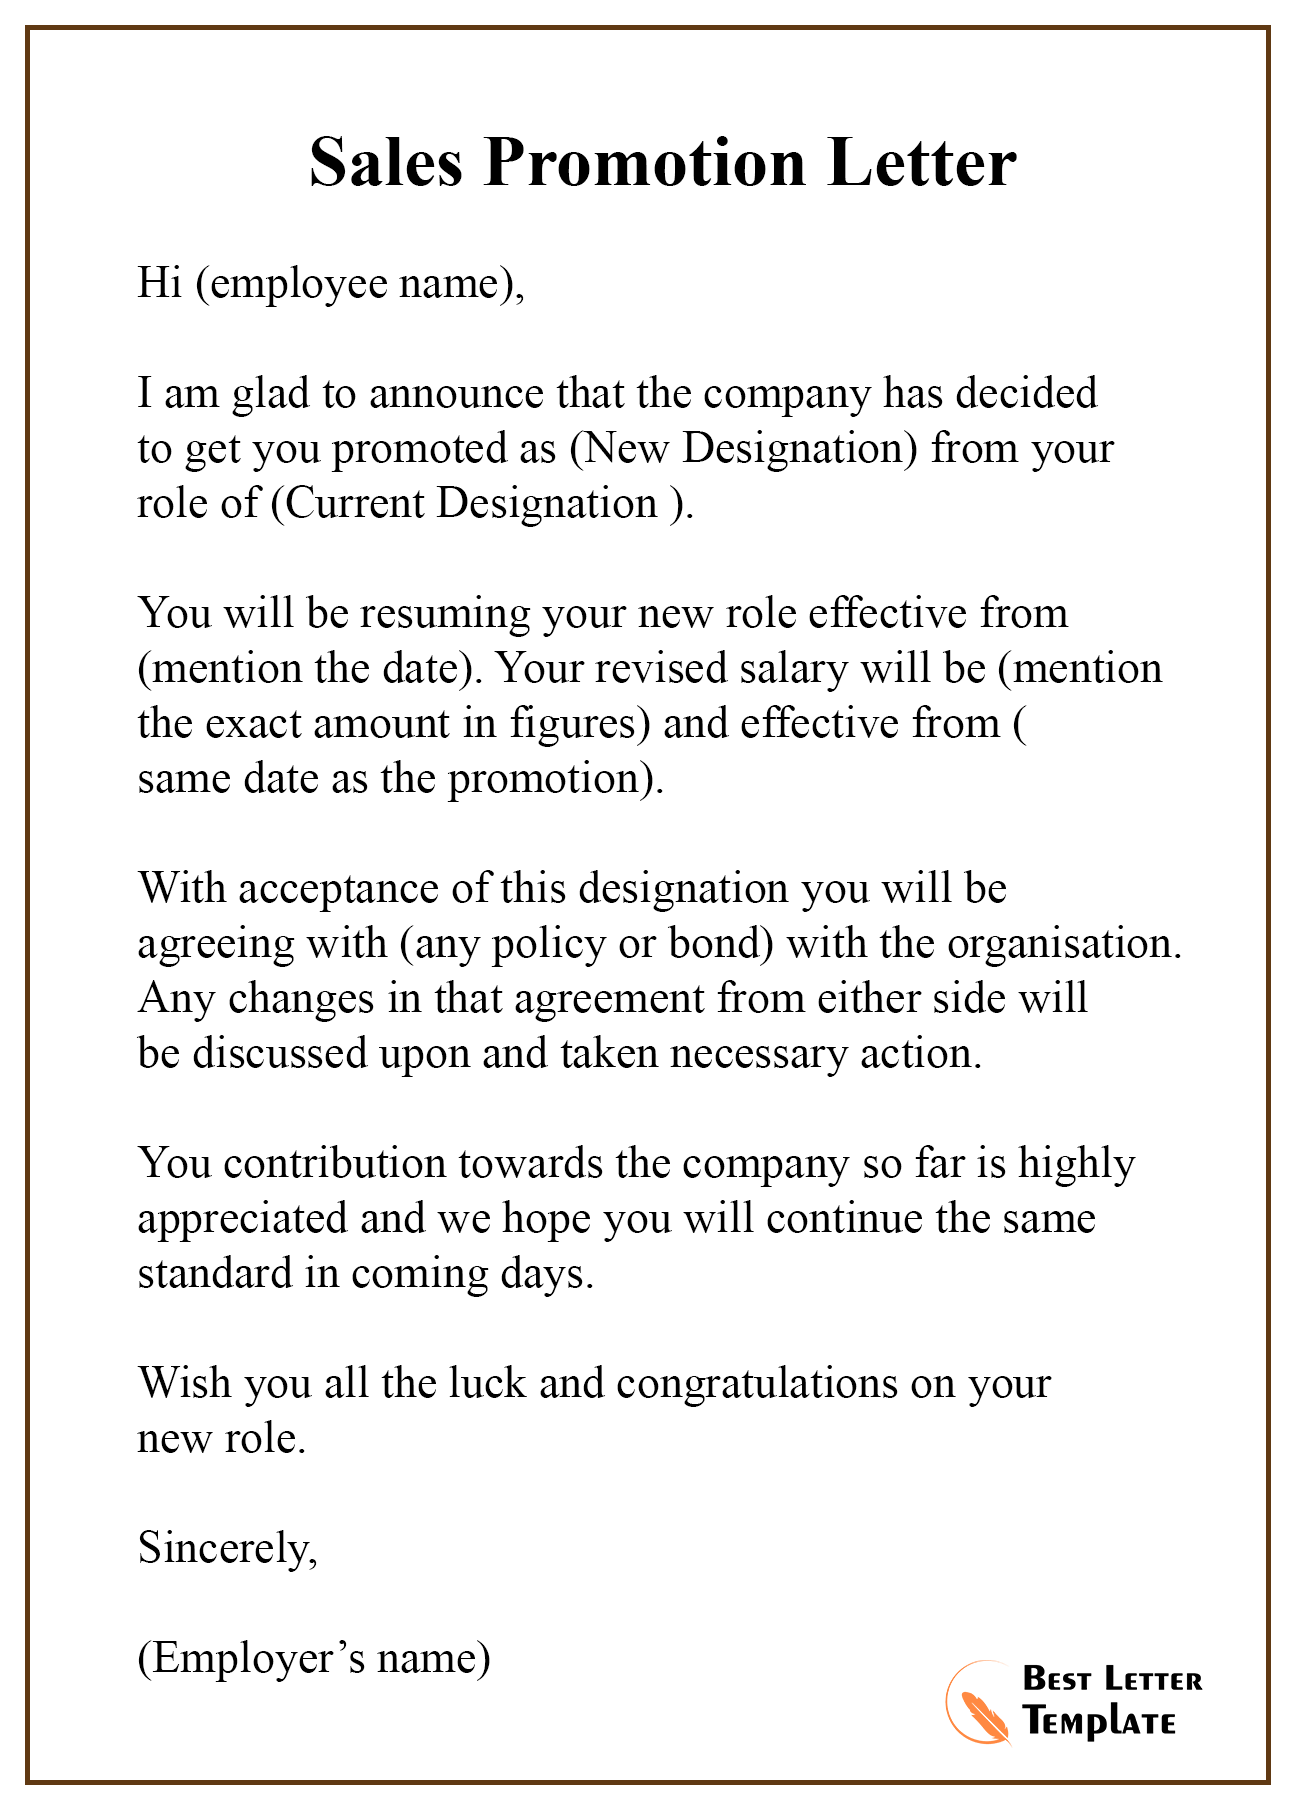 sample of cover letter for promotion